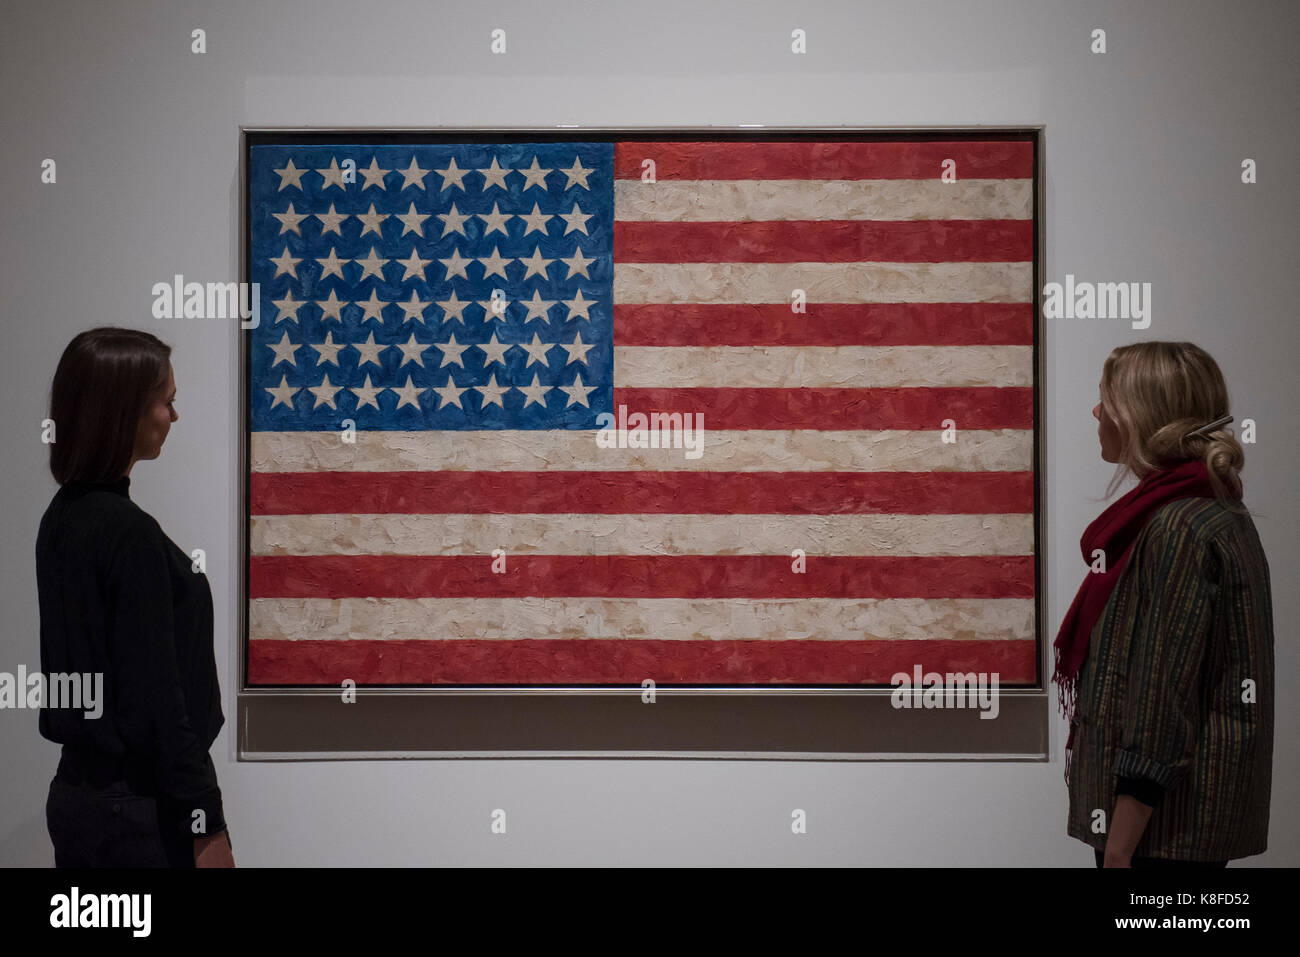 London, UK.  19 September 2017.  Staff members view 'Flag', 1958, by Jasper Johns.  Preview of a landmark exhibition by Jasper Johns RA called 'Something Resembling Truth' at the Royal Academy of Arts in Piccadilly.  Sculptures, drawing, prints plus new works are on display 25 September to 10 December 2017.  Credit: Stephen Chung / Alamy Live News Stock Photo